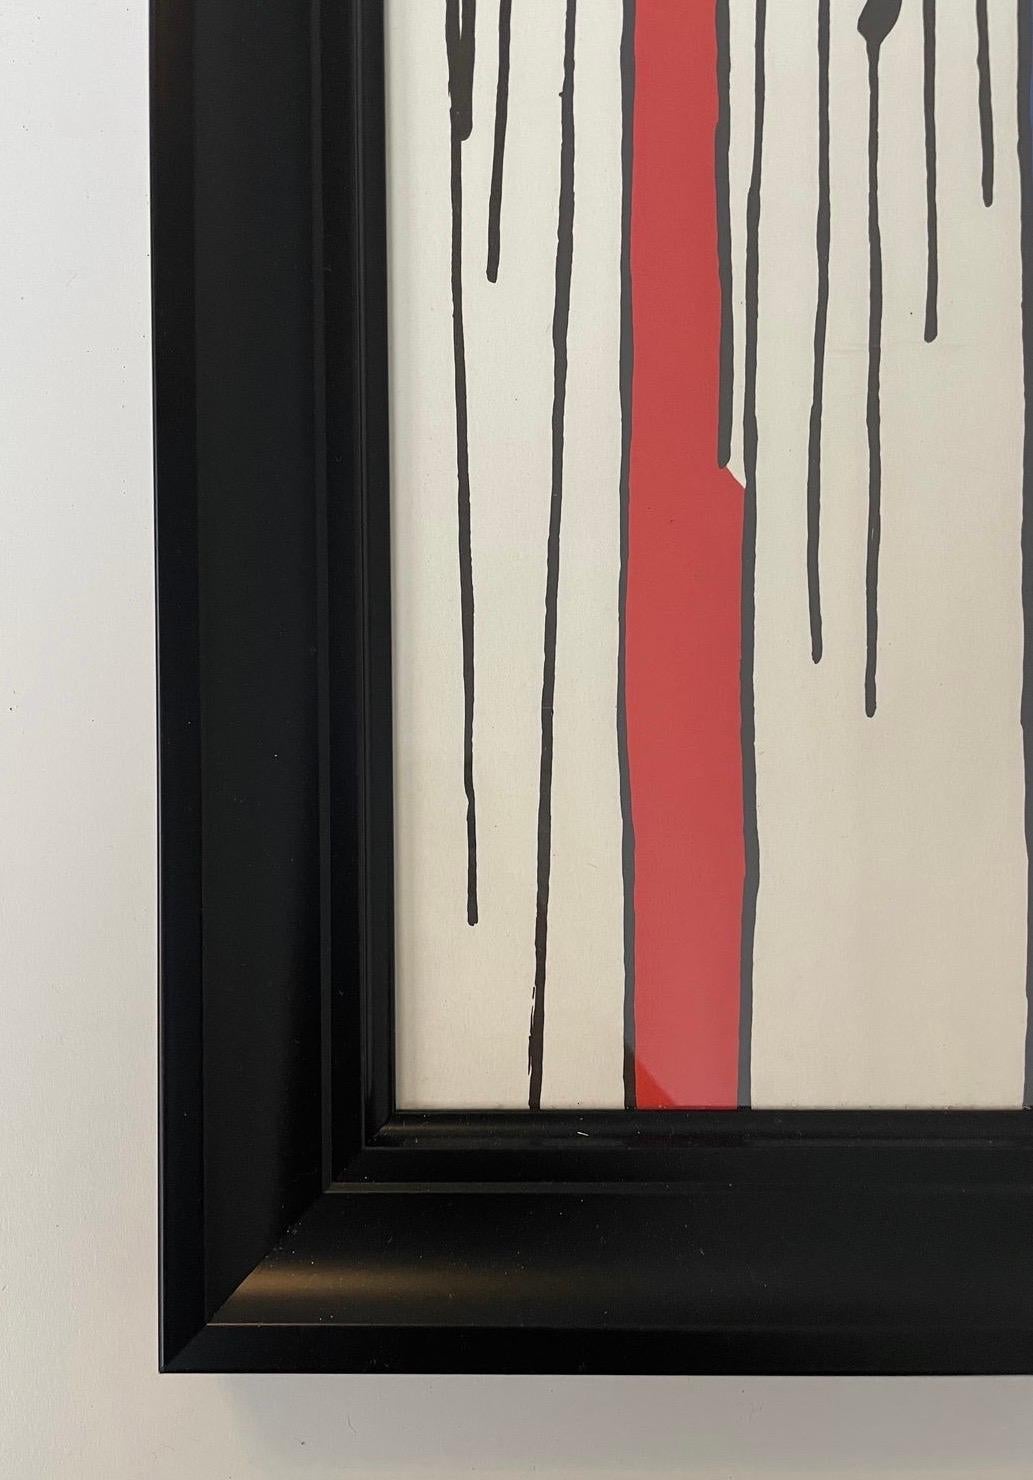 Print of Alexander Calder’s post-war abstract painting named “The Forest”, comes encased in a black frame.